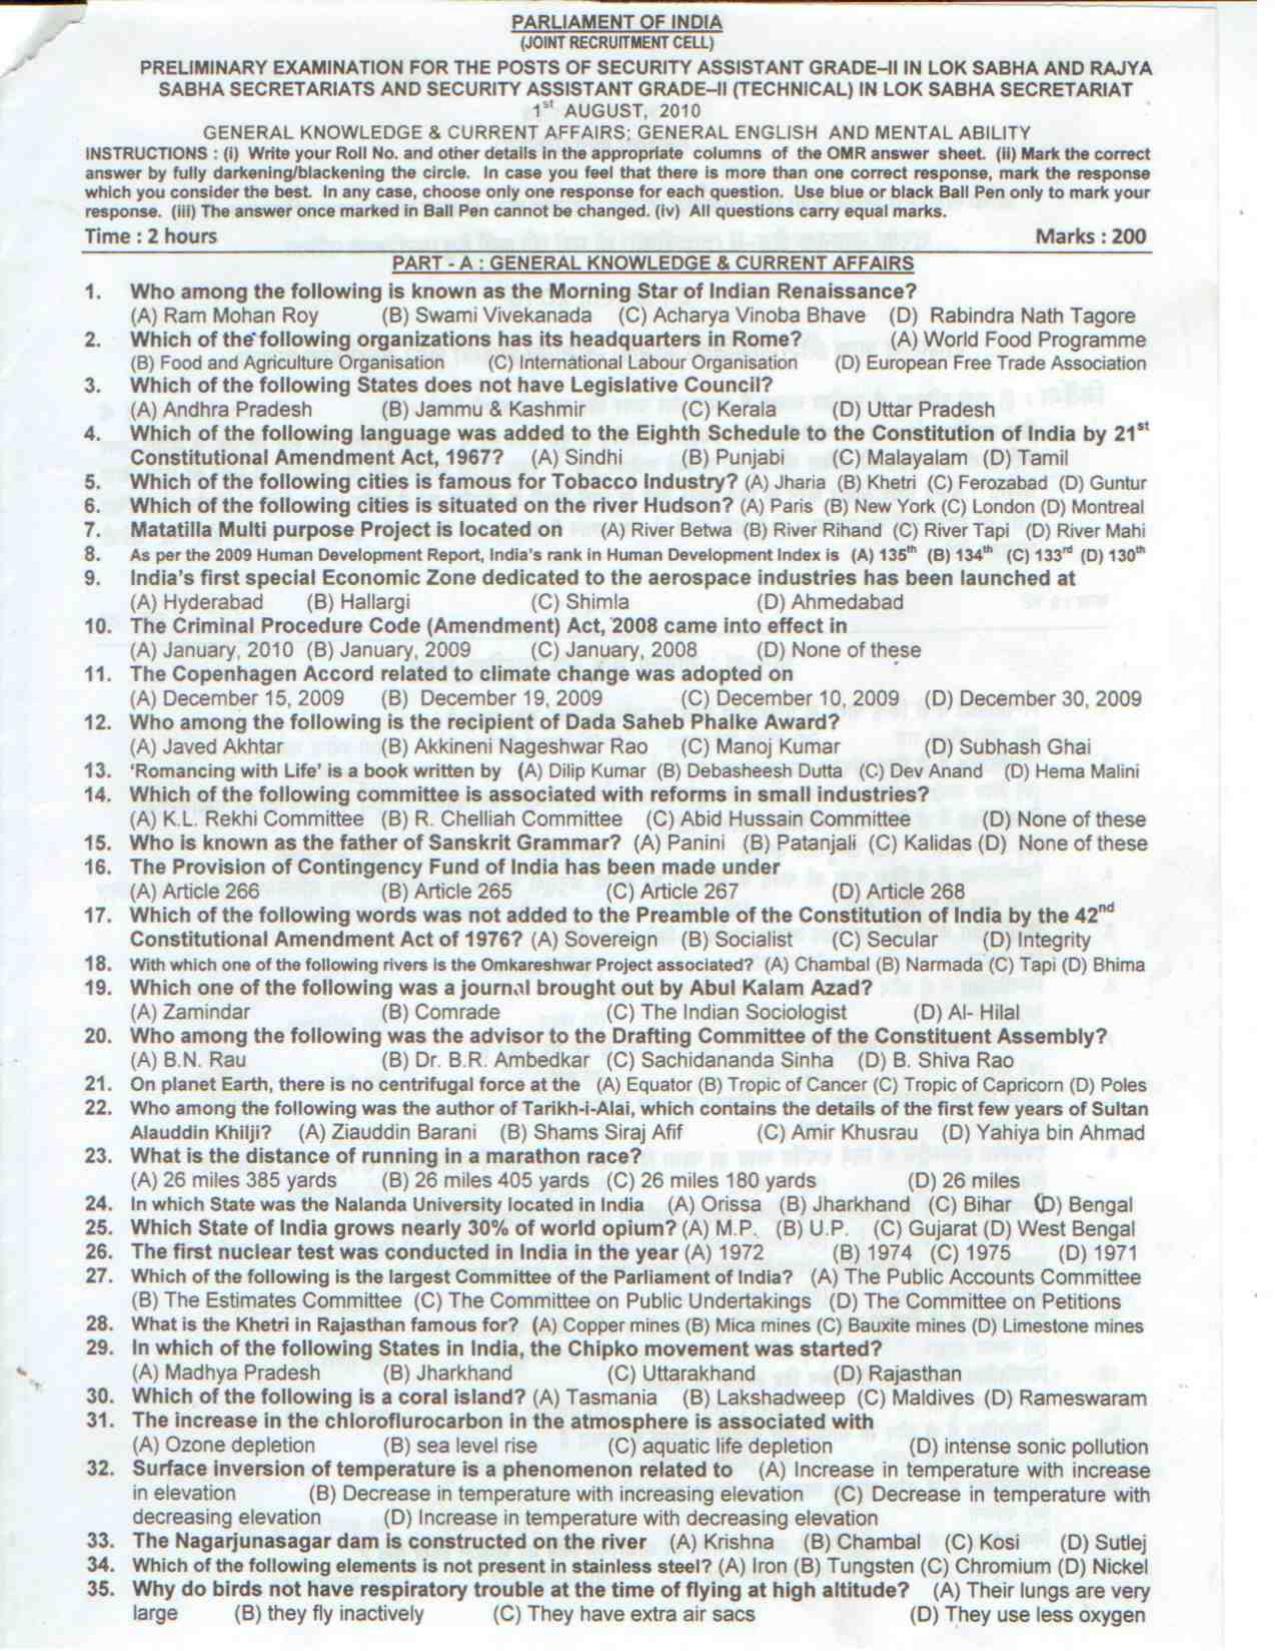 TS EAMCET 2010 Lok-Rajya Sabha: Security Assistant Grade-II Question Paper with Key (1 August 2010 Held on) - Page 1